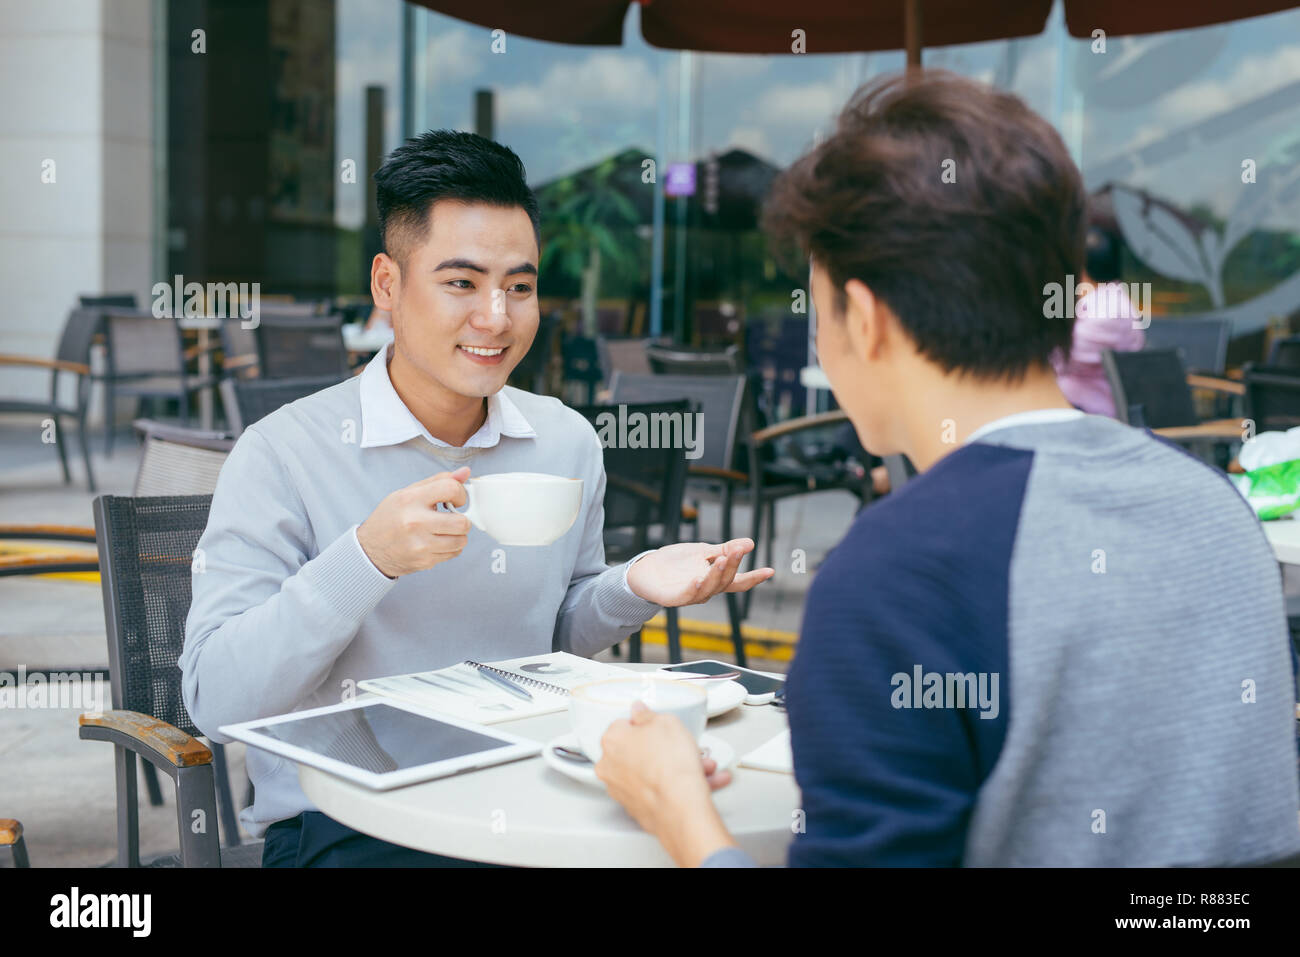 Checking stocks. Two business partners working on the laptop smiling cheerfully on a meeting at the local cafe - Image Stock Photo